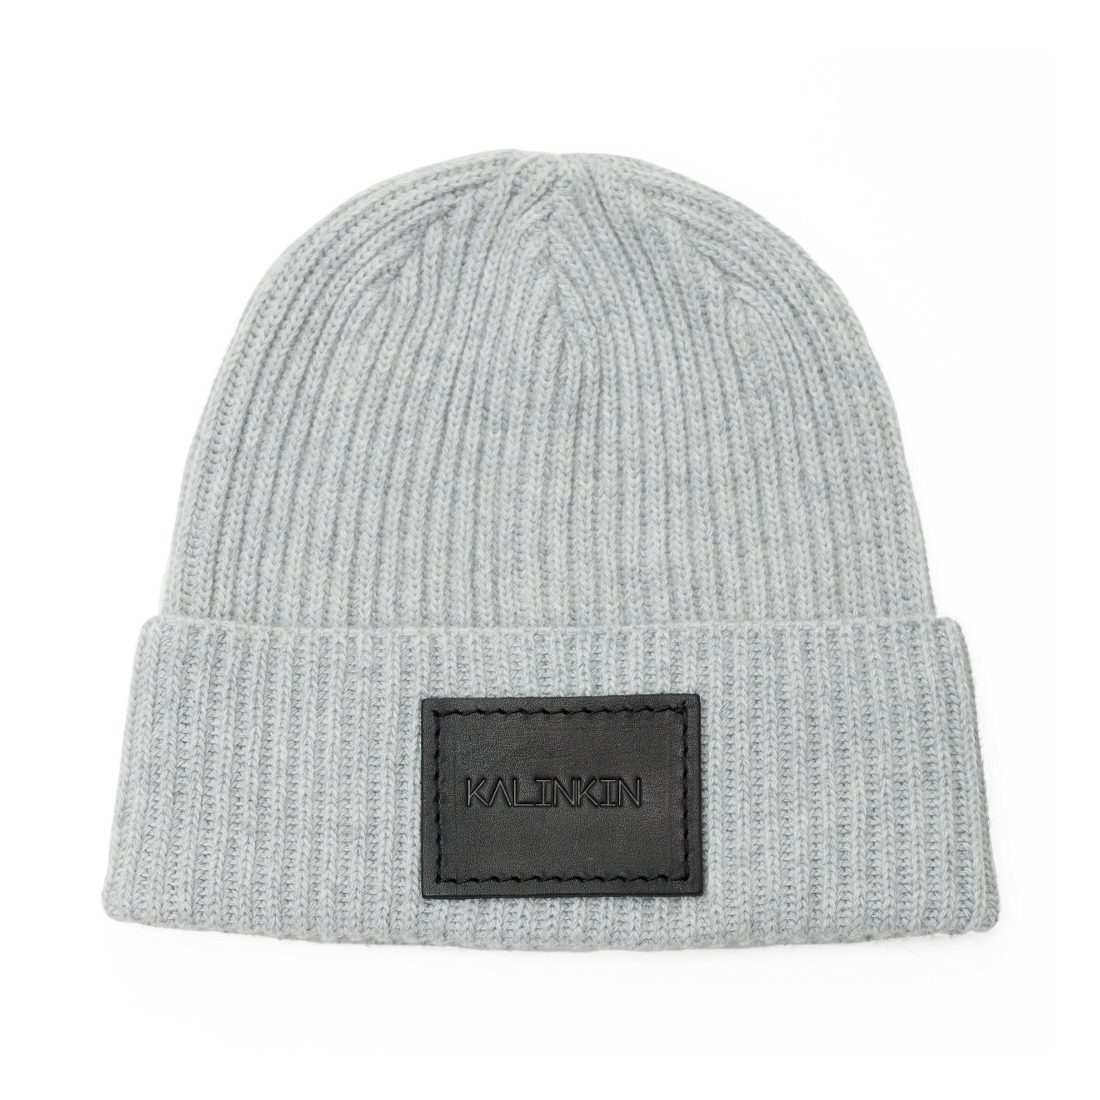 WARM THOUGHTS hat, leather grey